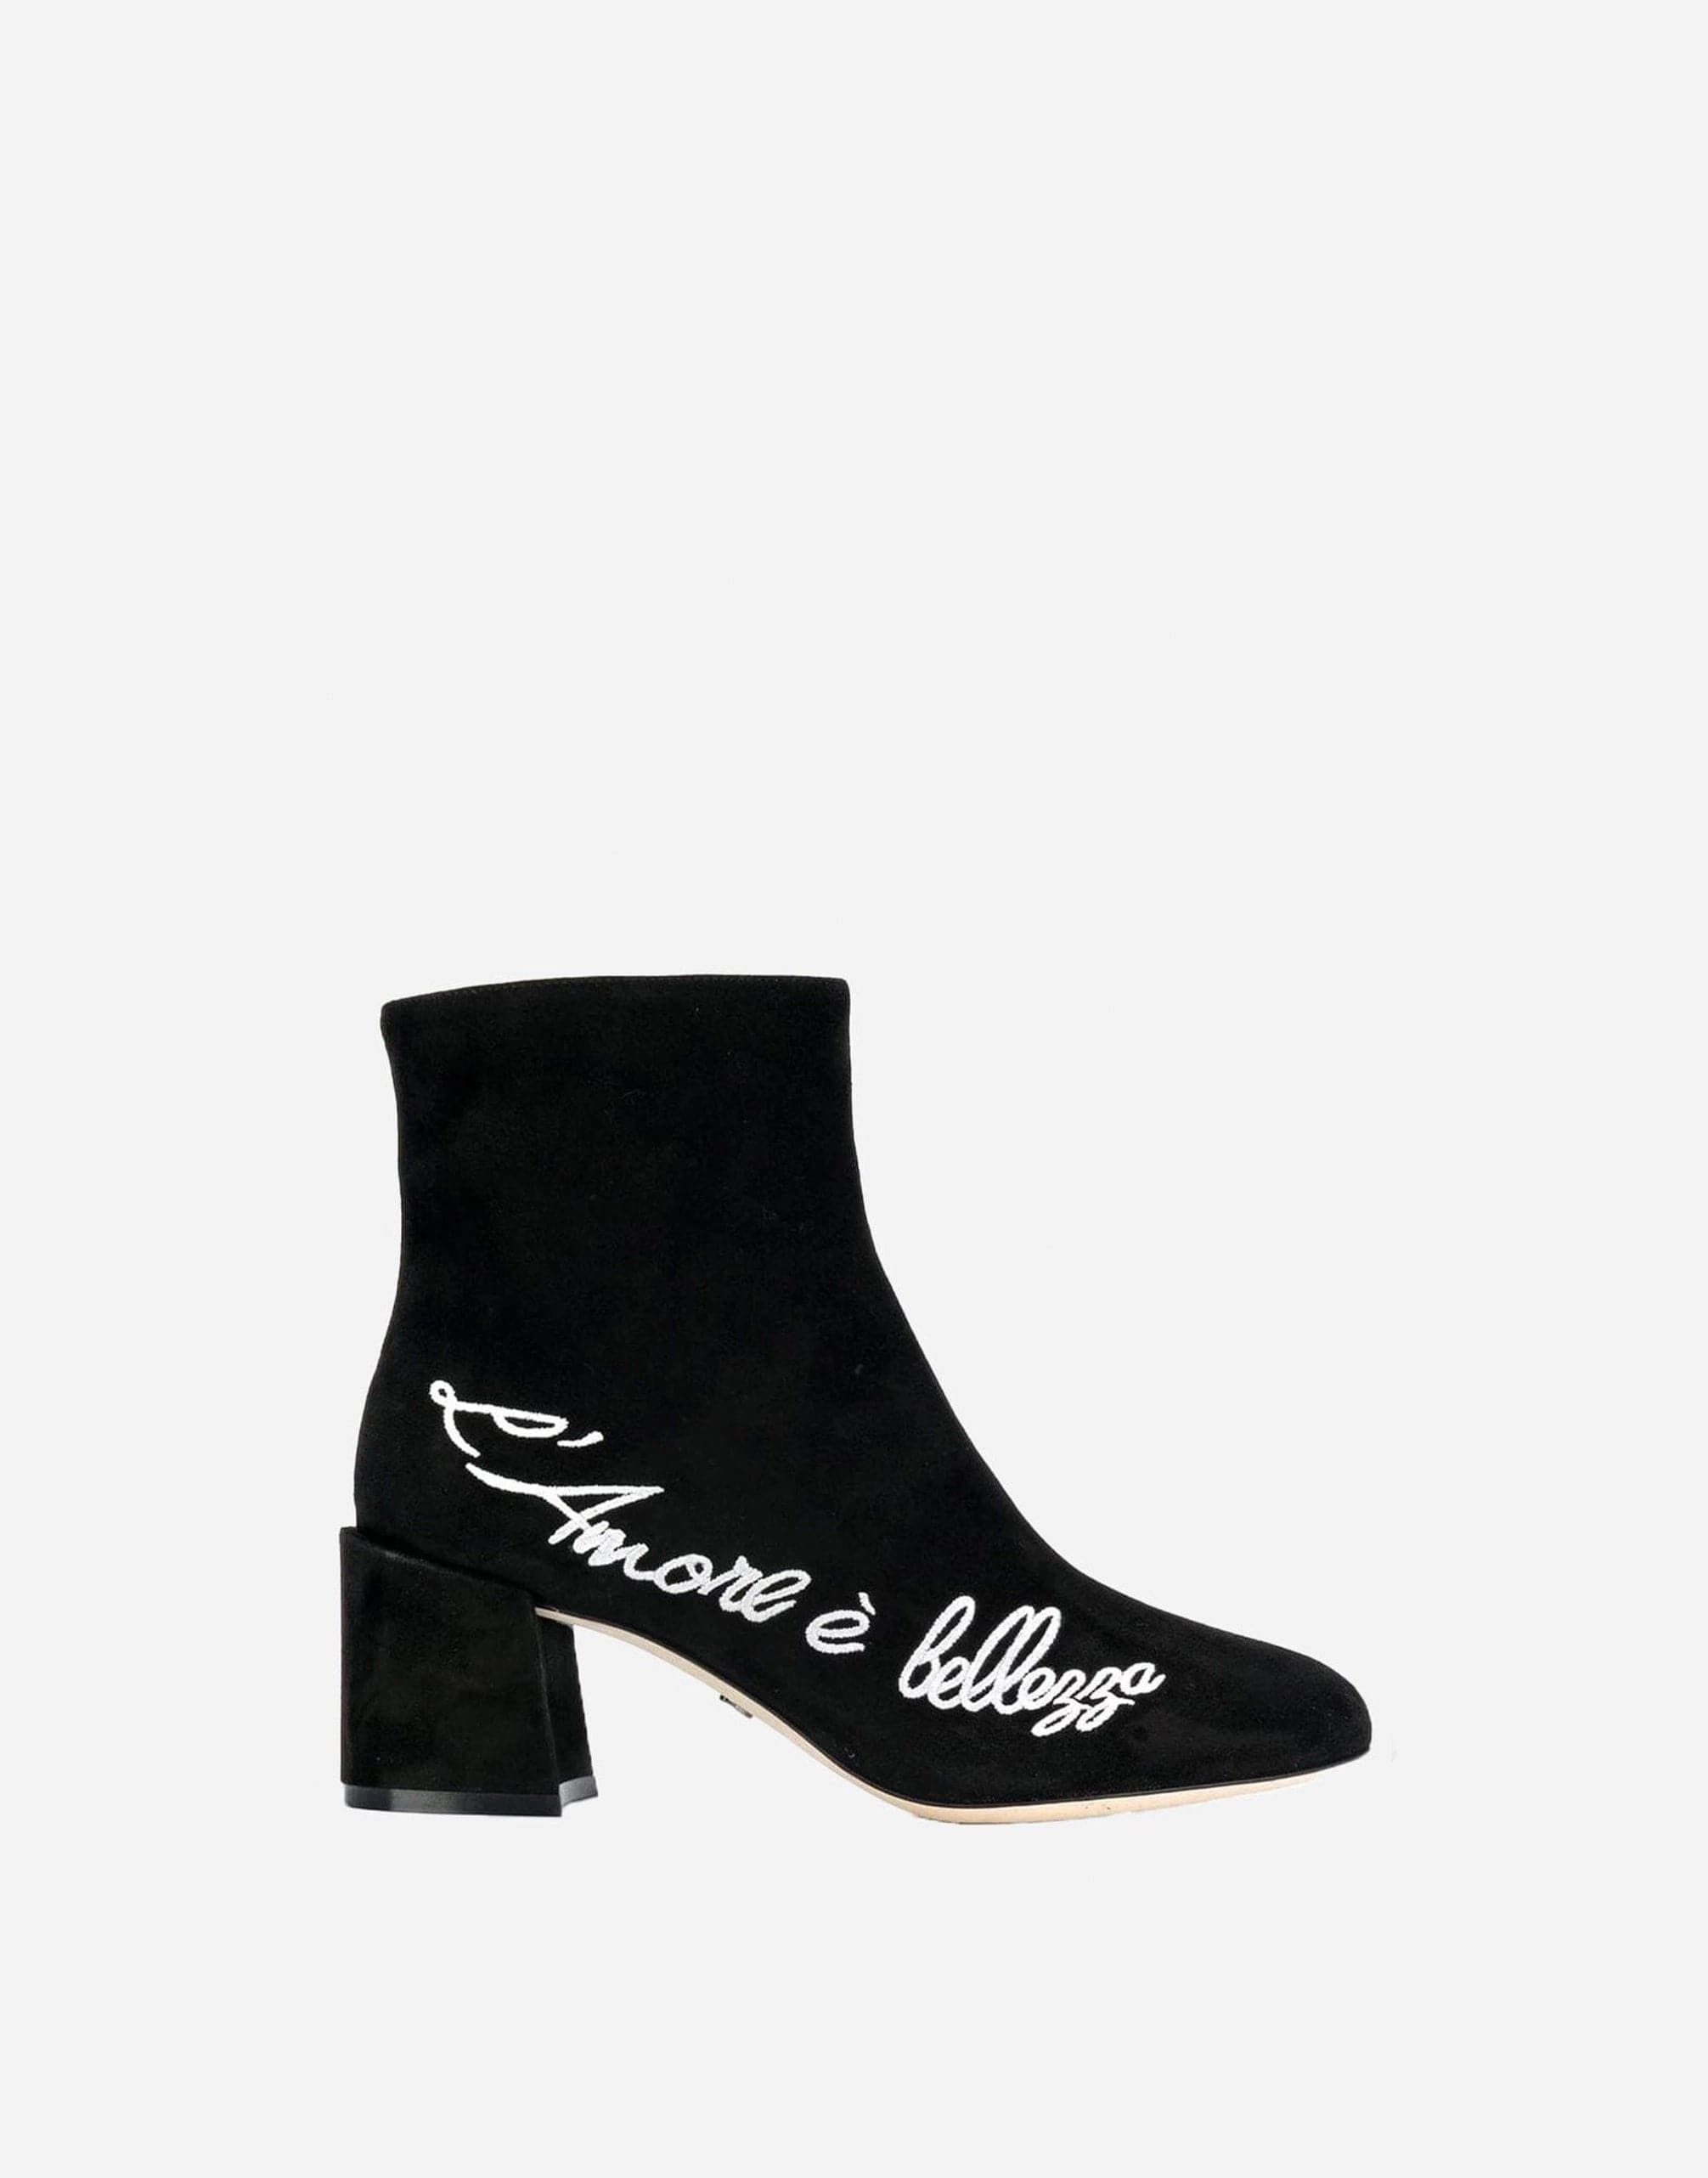 Dolce & Gabbana Embroidered Ankle Boots